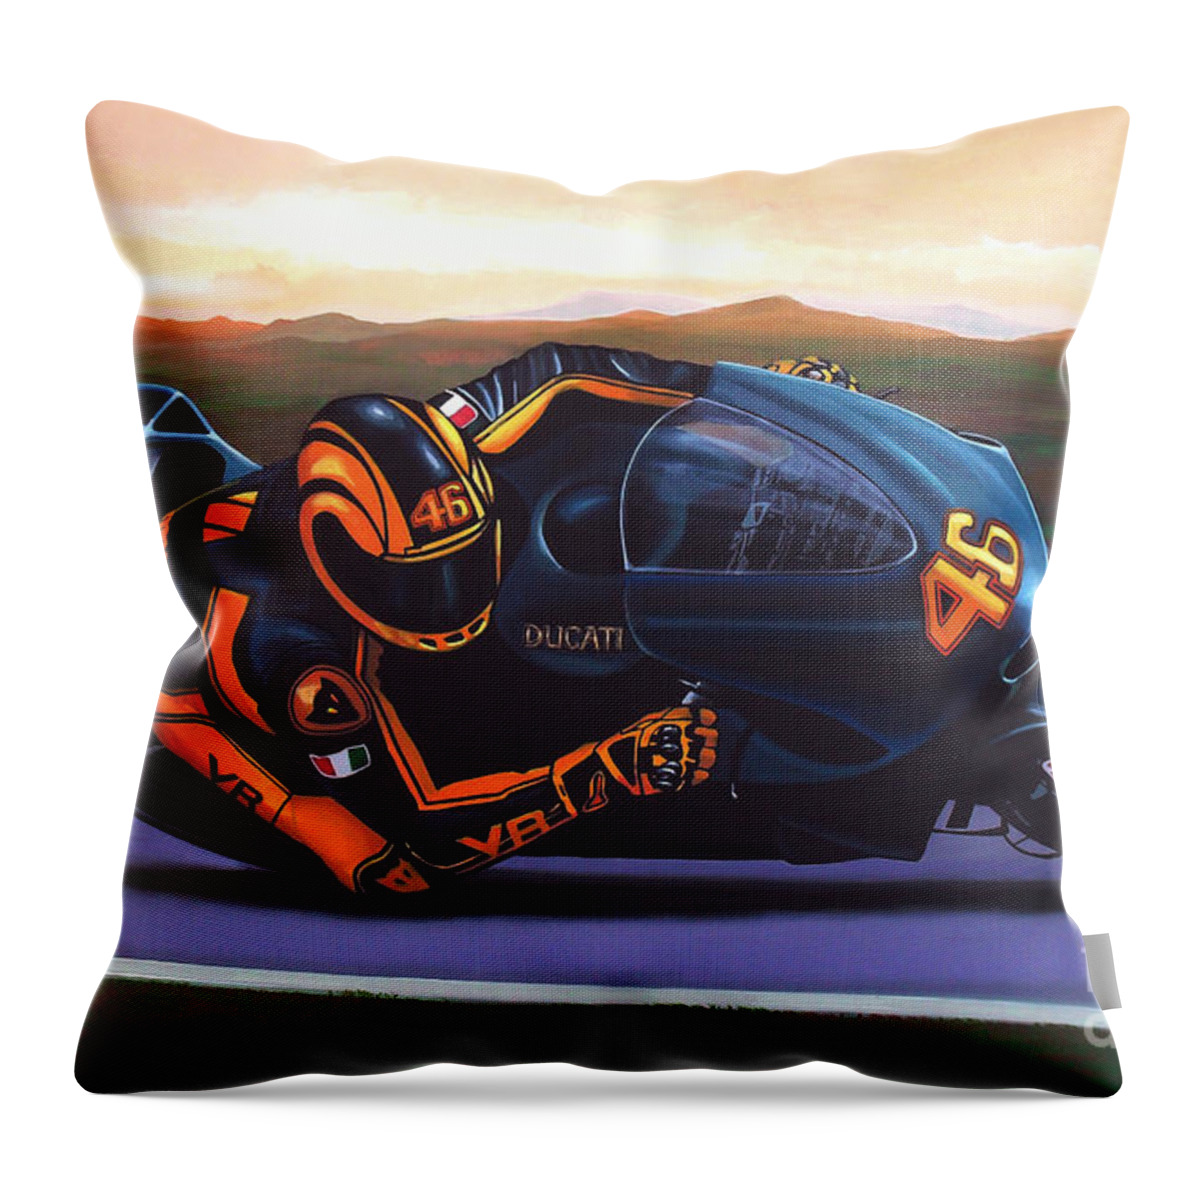 Valentino Rossi Throw Pillow featuring the painting Valentino Rossi on Ducati by Paul Meijering